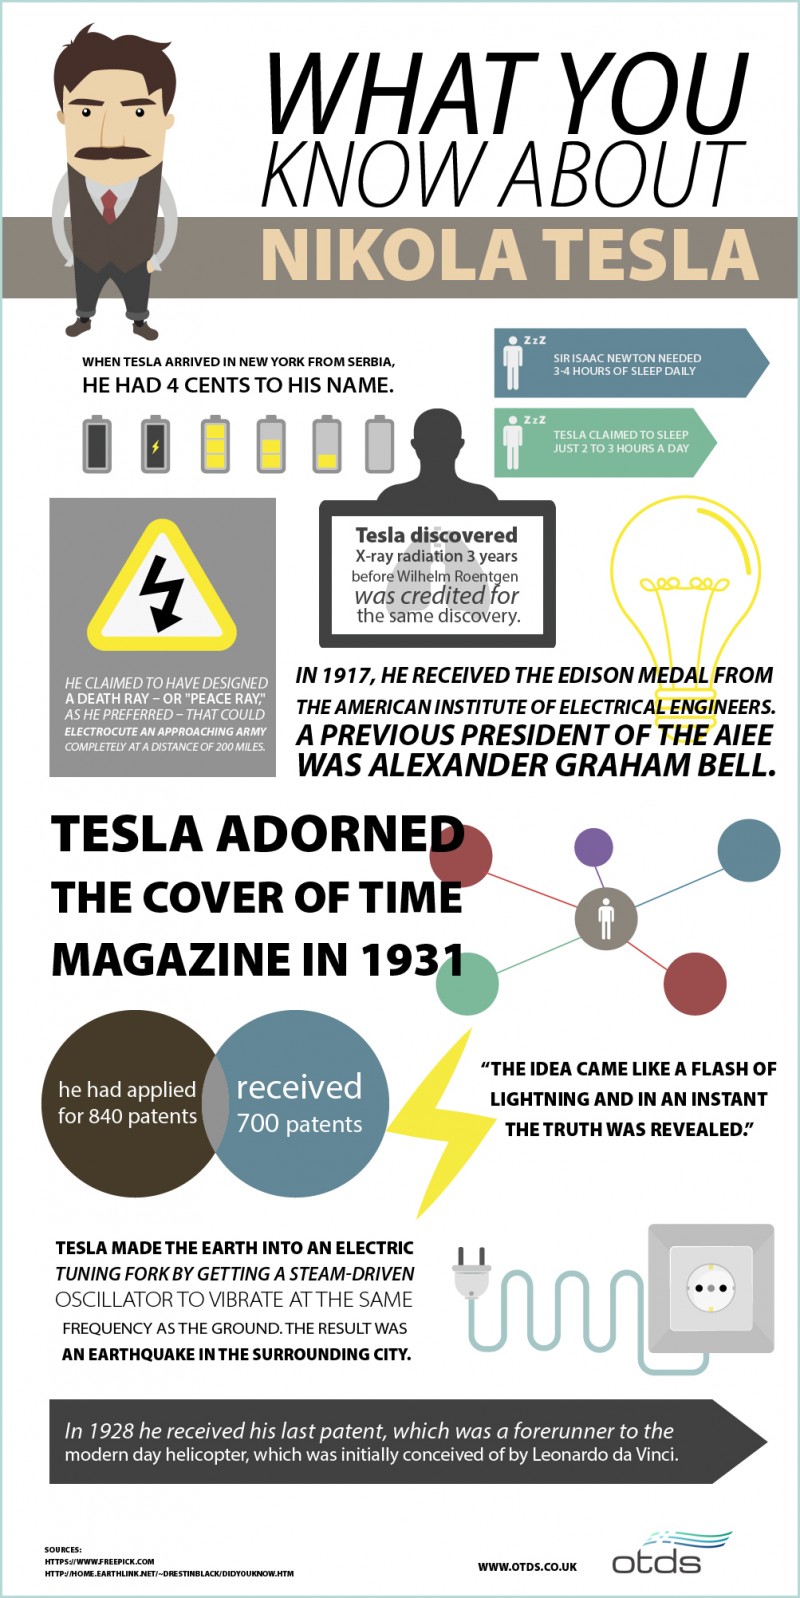 What Do You Know About Nicola Tesla [Infographic]